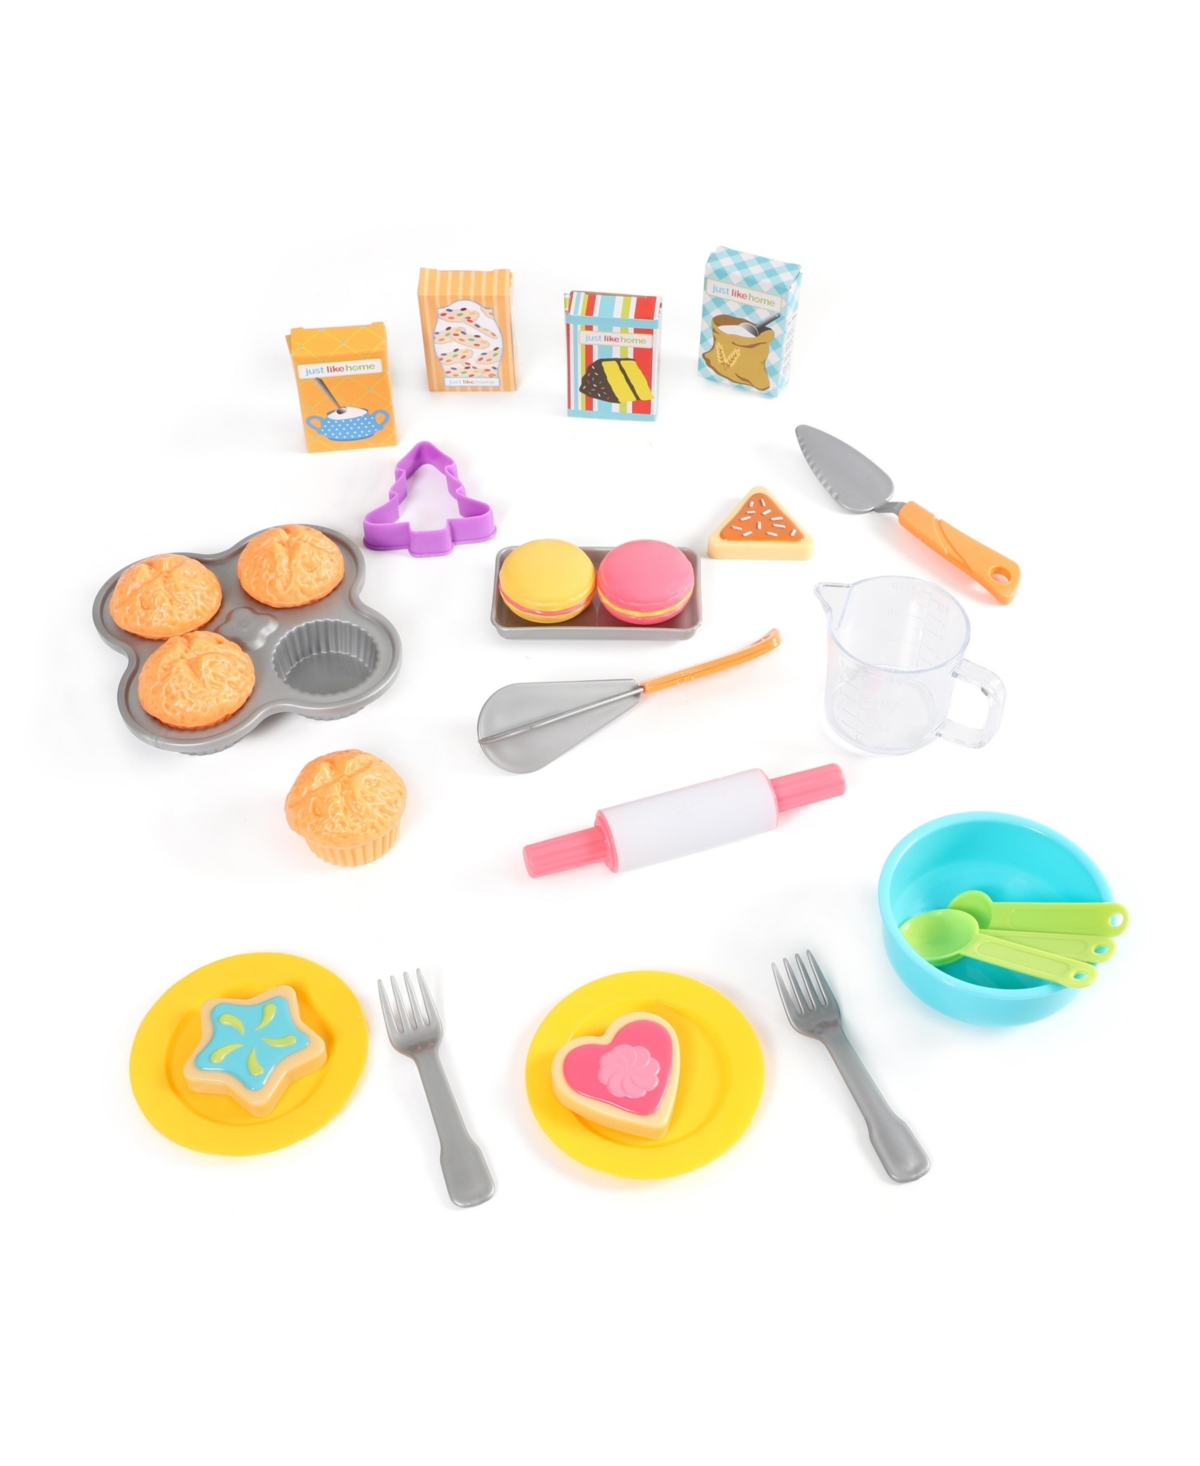 Baking Play set, Created for You by Toys R Us